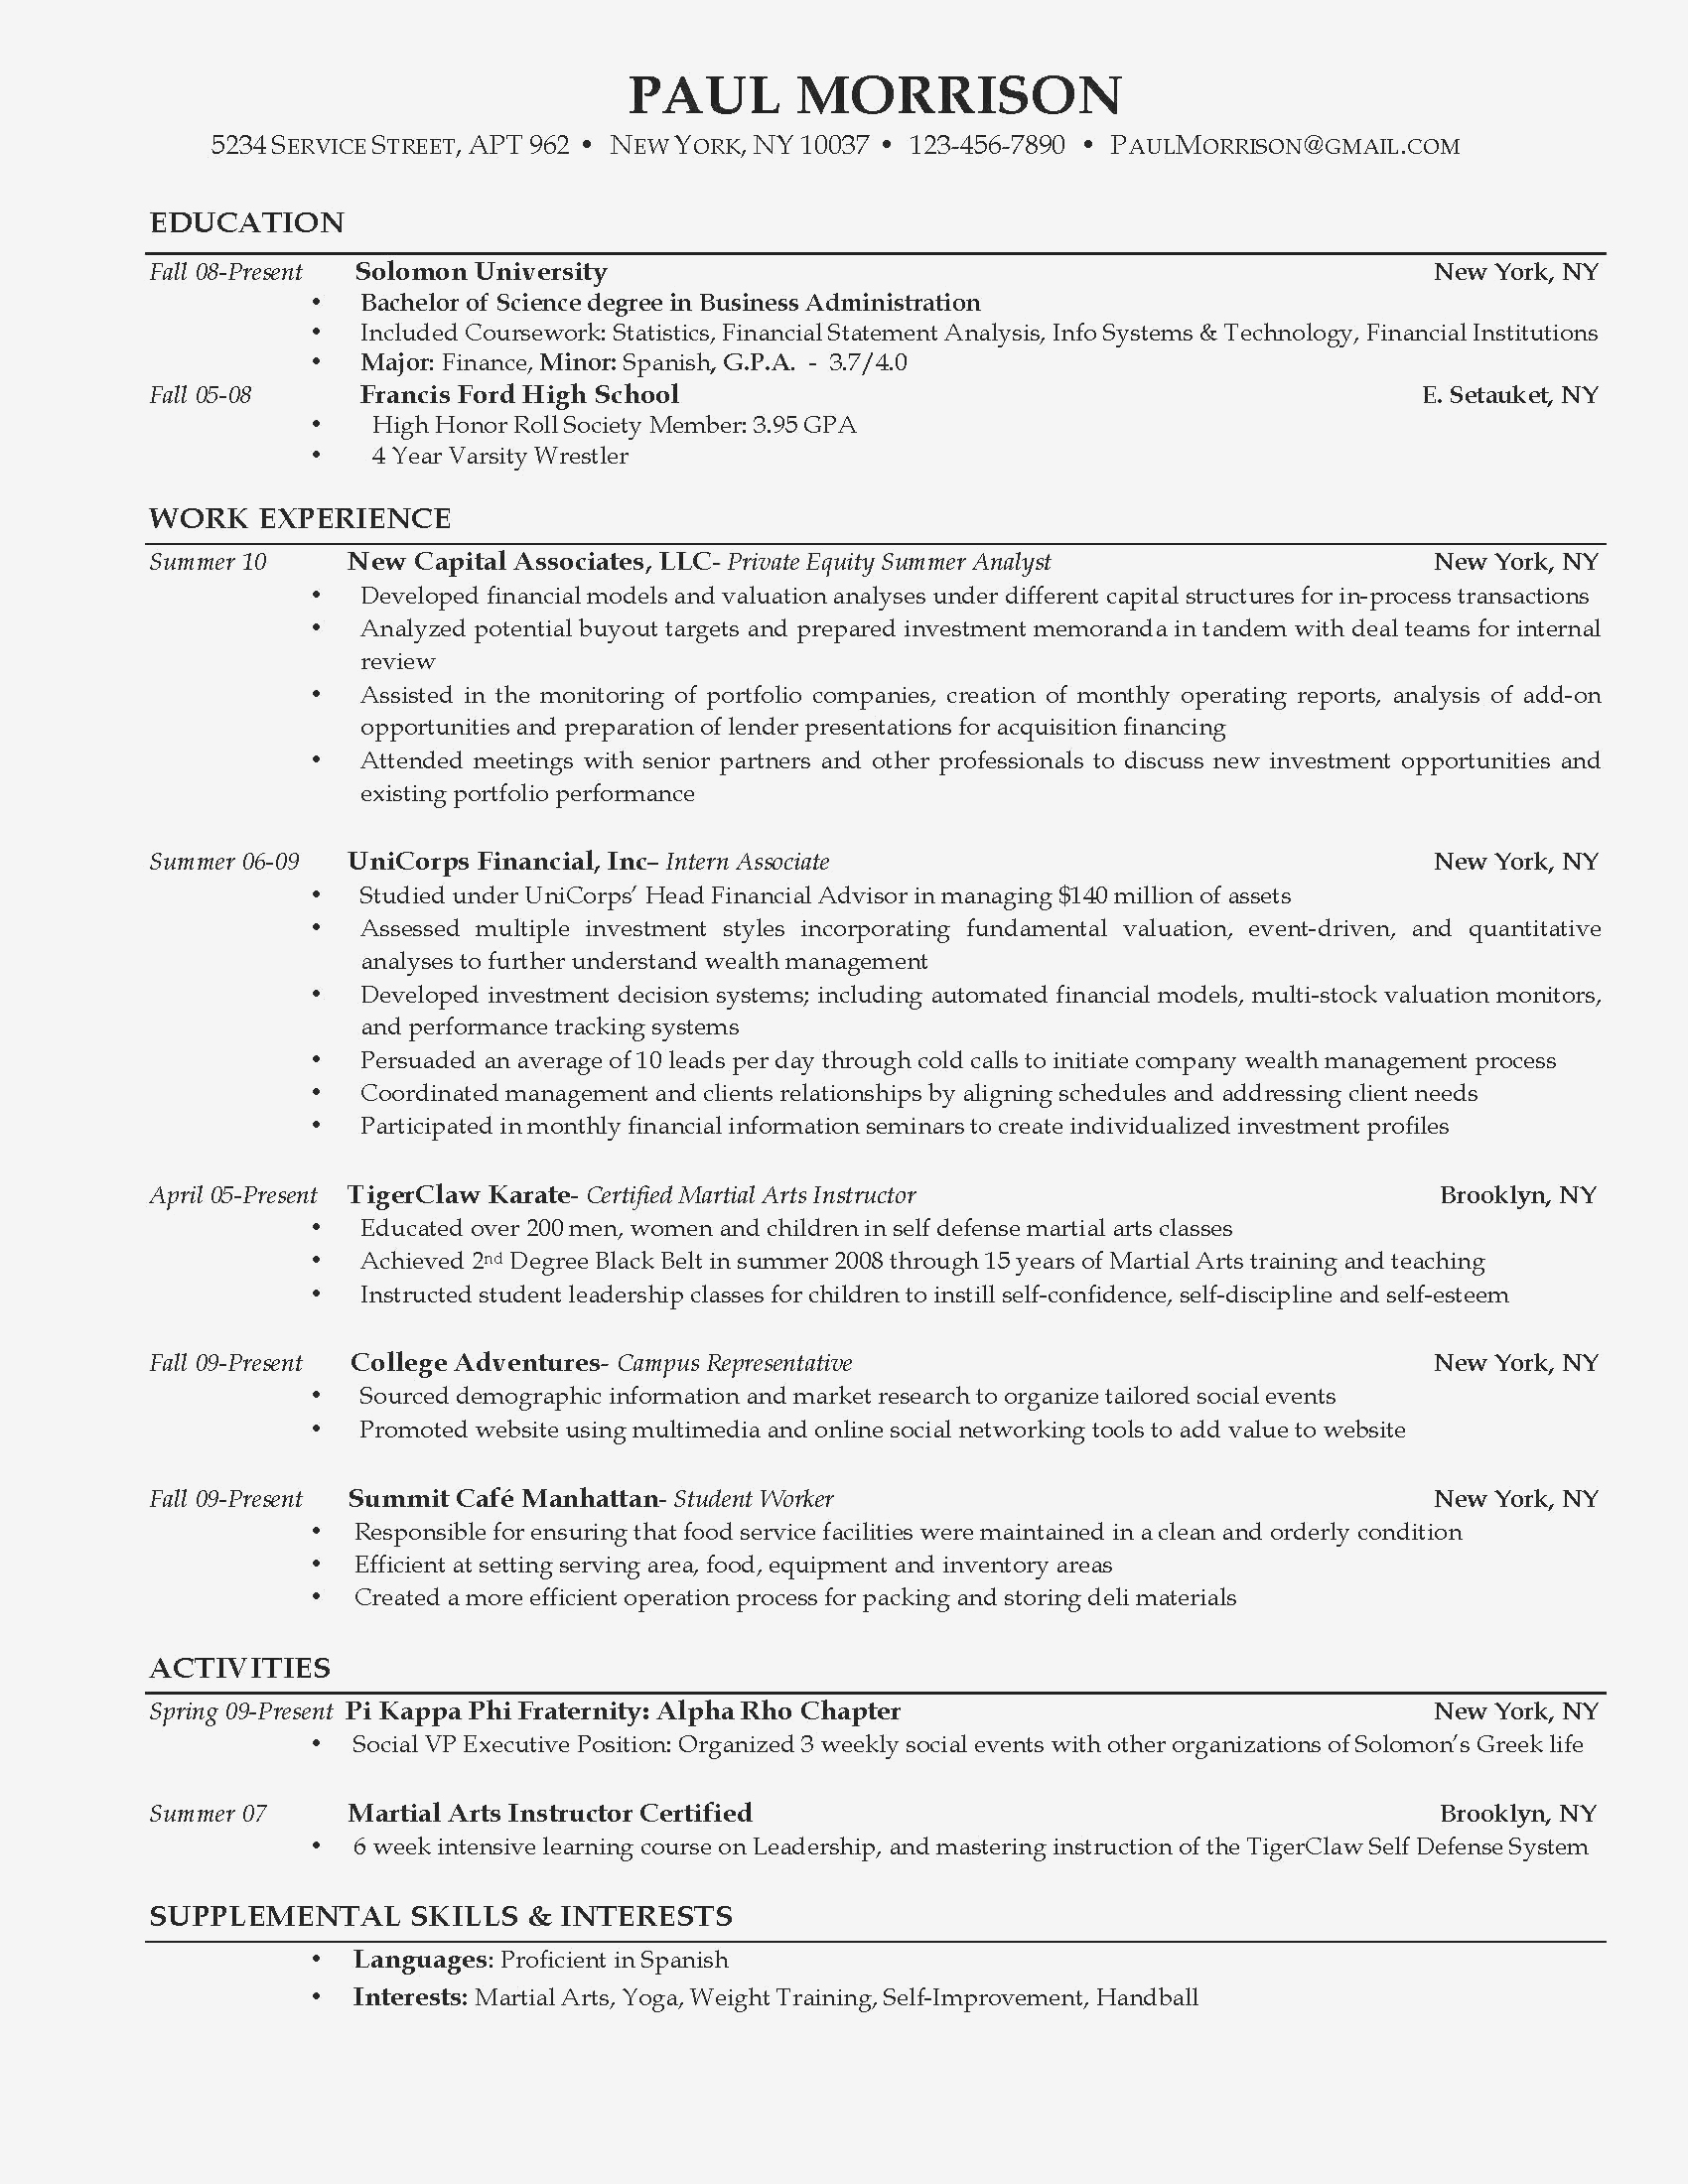 Resume Templates Microsoft Word College Student Resume Templates Microsoft Word New Microsoft Works Martial Arts Instructor Sample Resume Of Martial Arts Instructor Sample Resume resume templates microsoft word|wikiresume.com